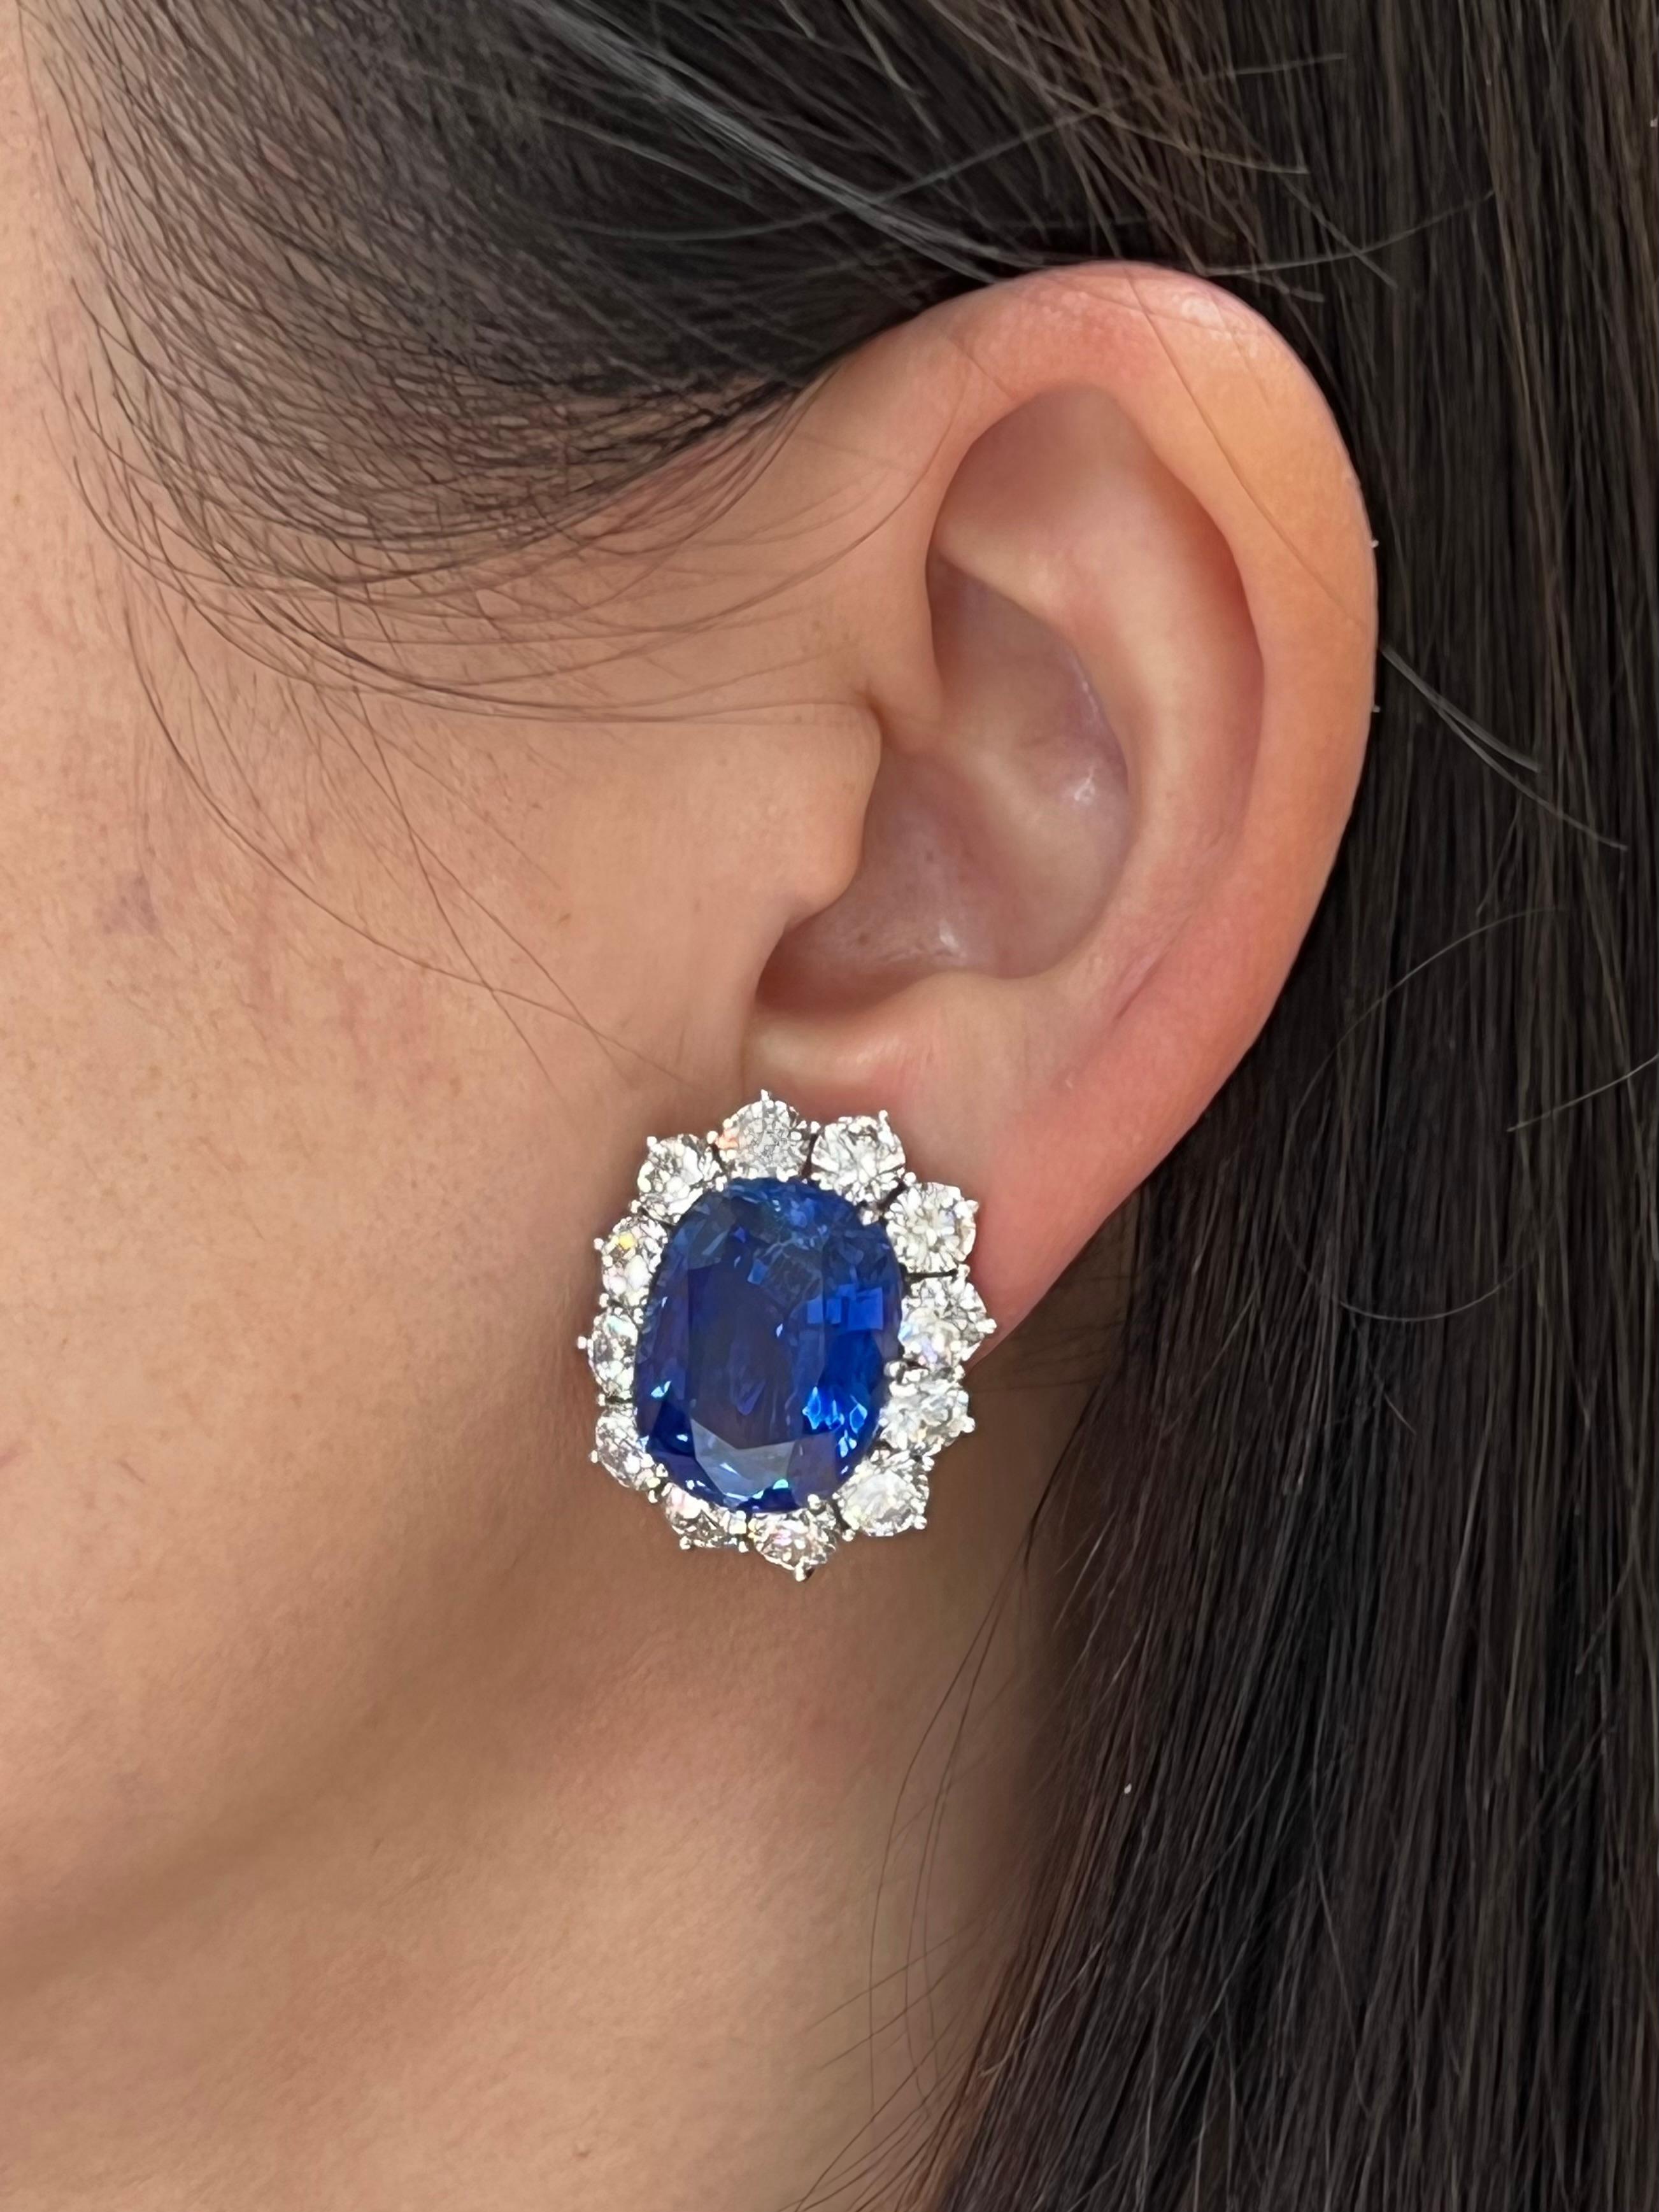 Please check out the HD video. These are important and substantial earrings! The Size, color and clarity of these sapphires are exceptional. A matching pair of this size and quality is almost impossible to find. Each sapphire is over 18 carats,